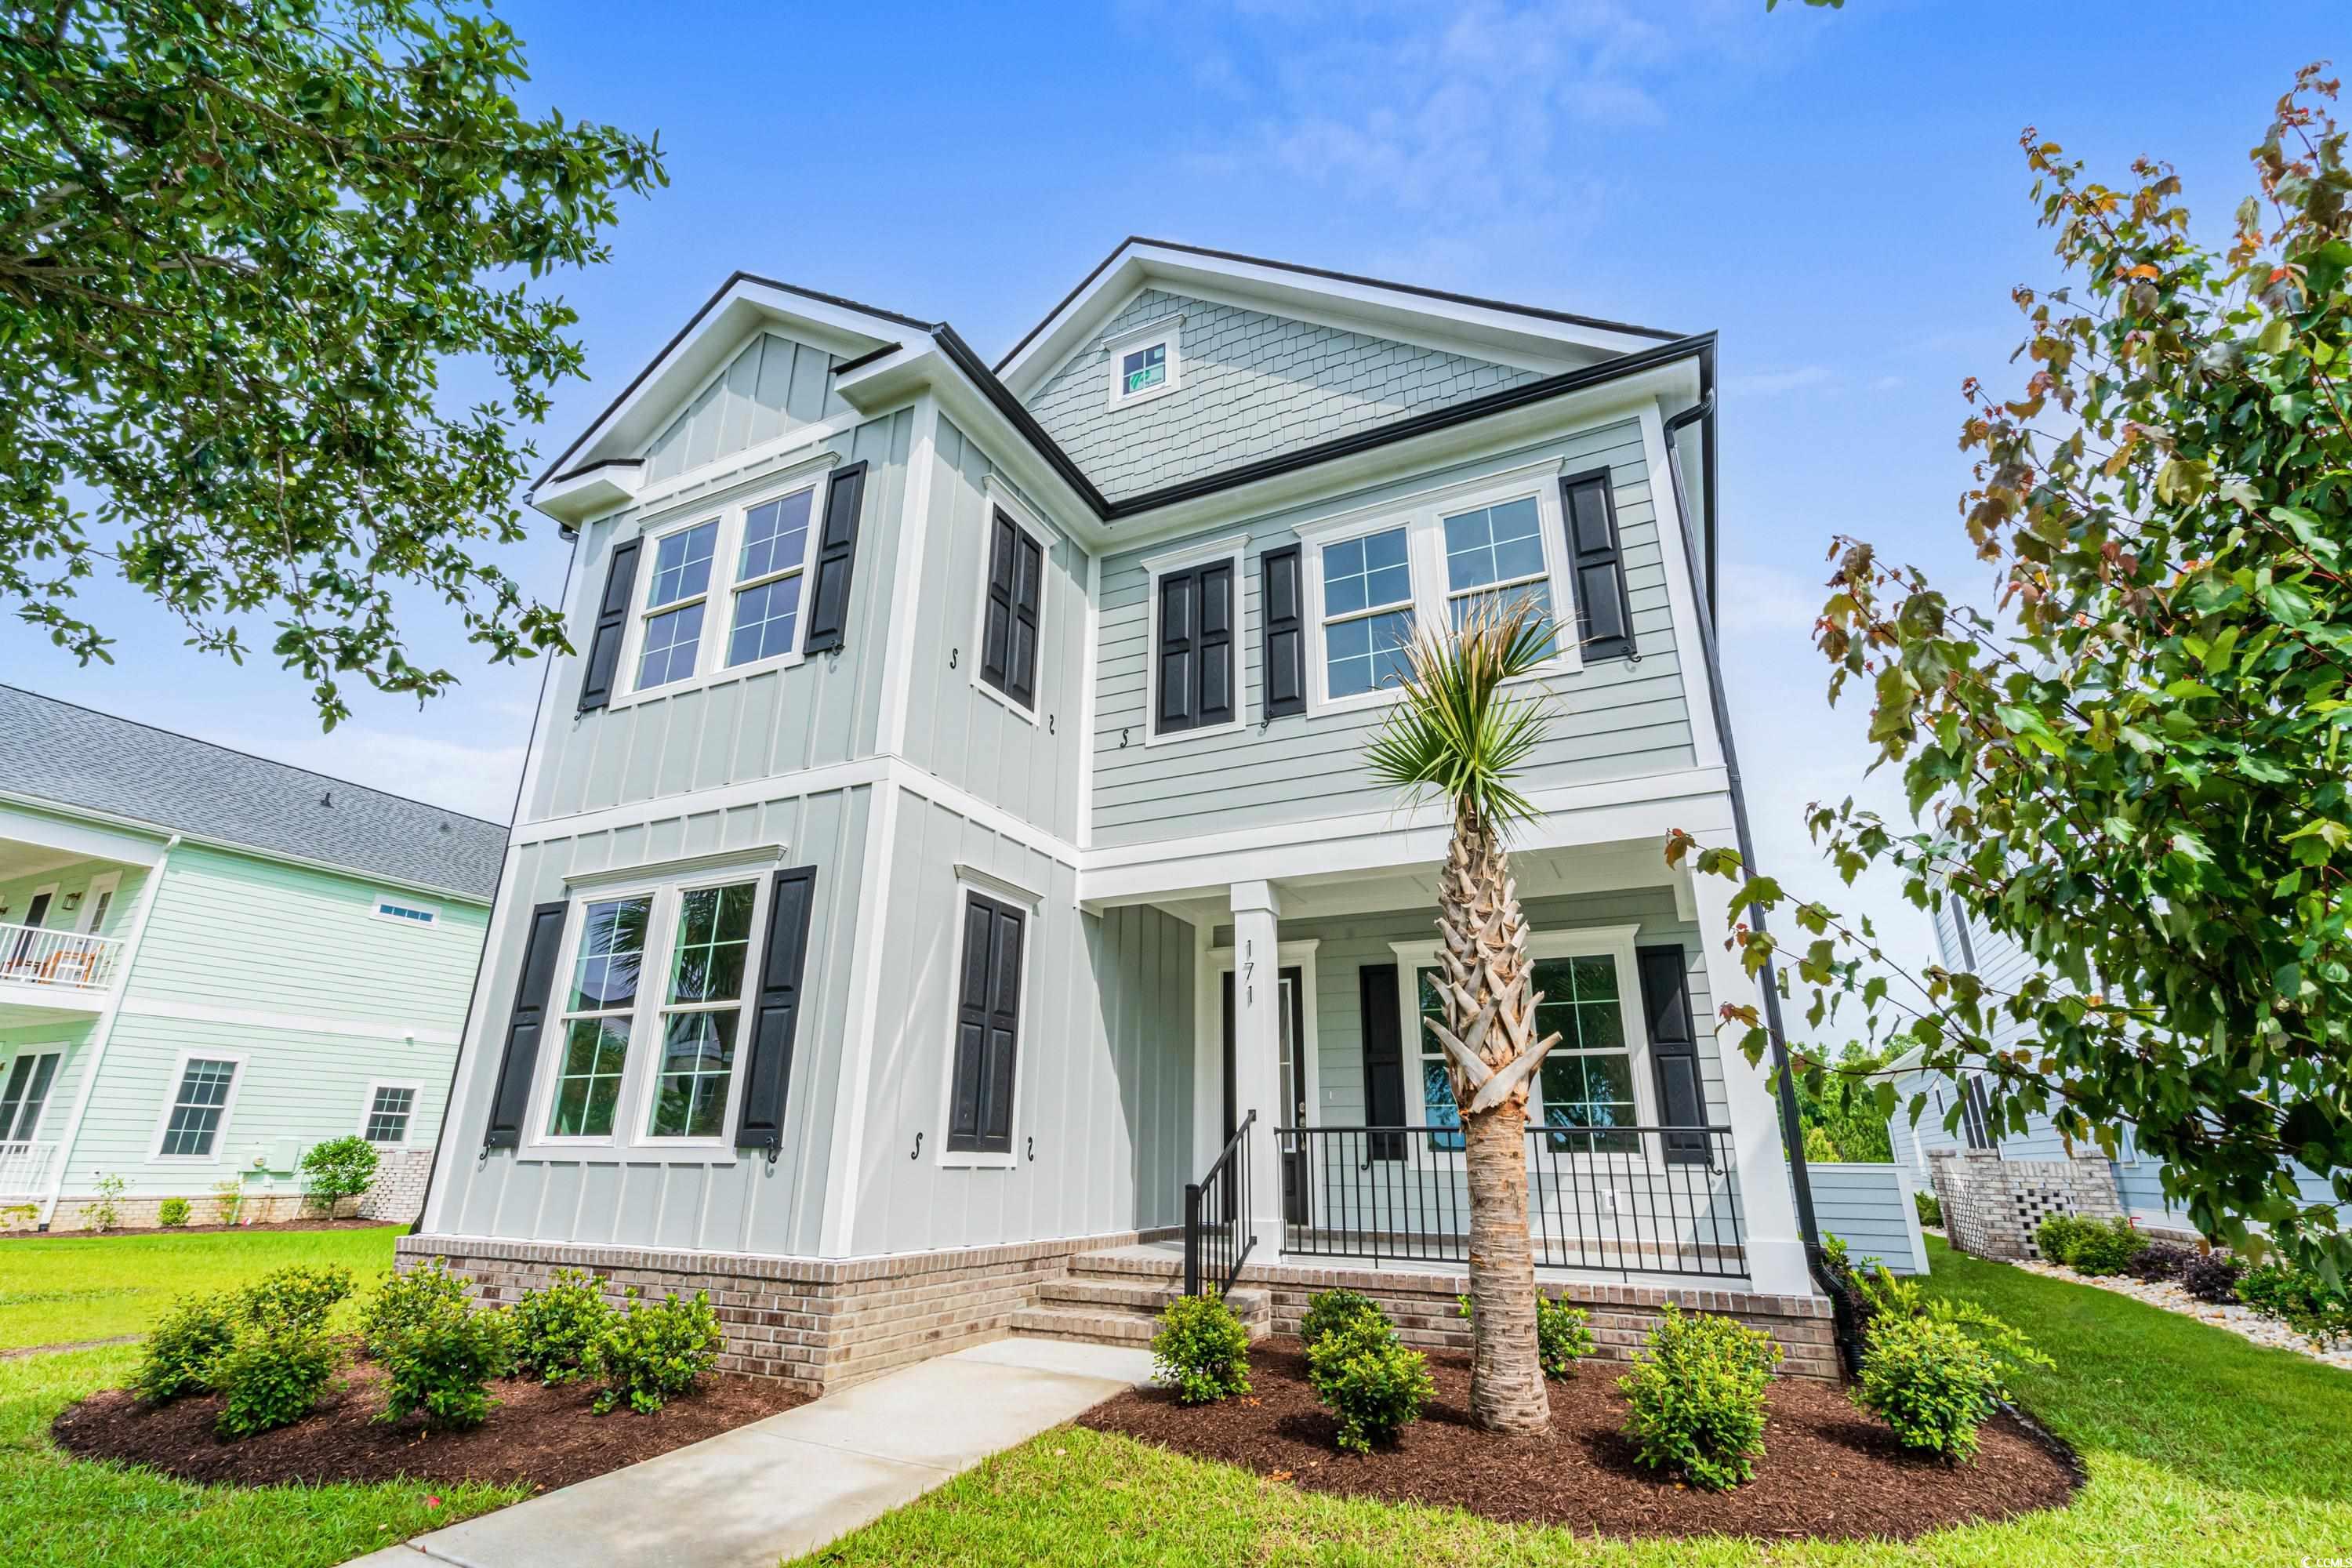 new construction available late april! this 6 bedroom, 4.5 bath is located in the prestigious waterway palms plantation neighborhood in carolina forest. walk into this gorgeous home with a large foyer that leads to all this home encompasses! upon entering there is a bedroom with glass double doors which could also be used as a study/office. down the foyer opens up to a large living room, open kitchen with formal dining. a butler style cabinet that leads to a huge walk in pantry with built in shelves. master bedroom boasts a tray ceiling and a beautiful walk in-closet with built-ins. primary bathroom has beautiful double vanity, walk in tiled shower and a large garden tub for soaking the stress away. mud room located downstairs for drop off and laundry. a half bath for guests in hallway. follow the stairs up and have a loft area with a built in cabinet for hosting or serving. with a 2nd washer/dryer room in the loft. 4 bedrooms on the 2nd floor. 2 bedrooms have a jack and jill bathroom, other 2 bedrooms have bathrooms right outside.   outside has a built in grill and sink for cooking and entertaining guests with a larger backyard. a nice breezeway that leads you to your 3-car garage! a definite selling point in this neighborhood. don't miss your opportunity to enjoy this custom home. 20 minutes from the beach and surrounded by all you could need!